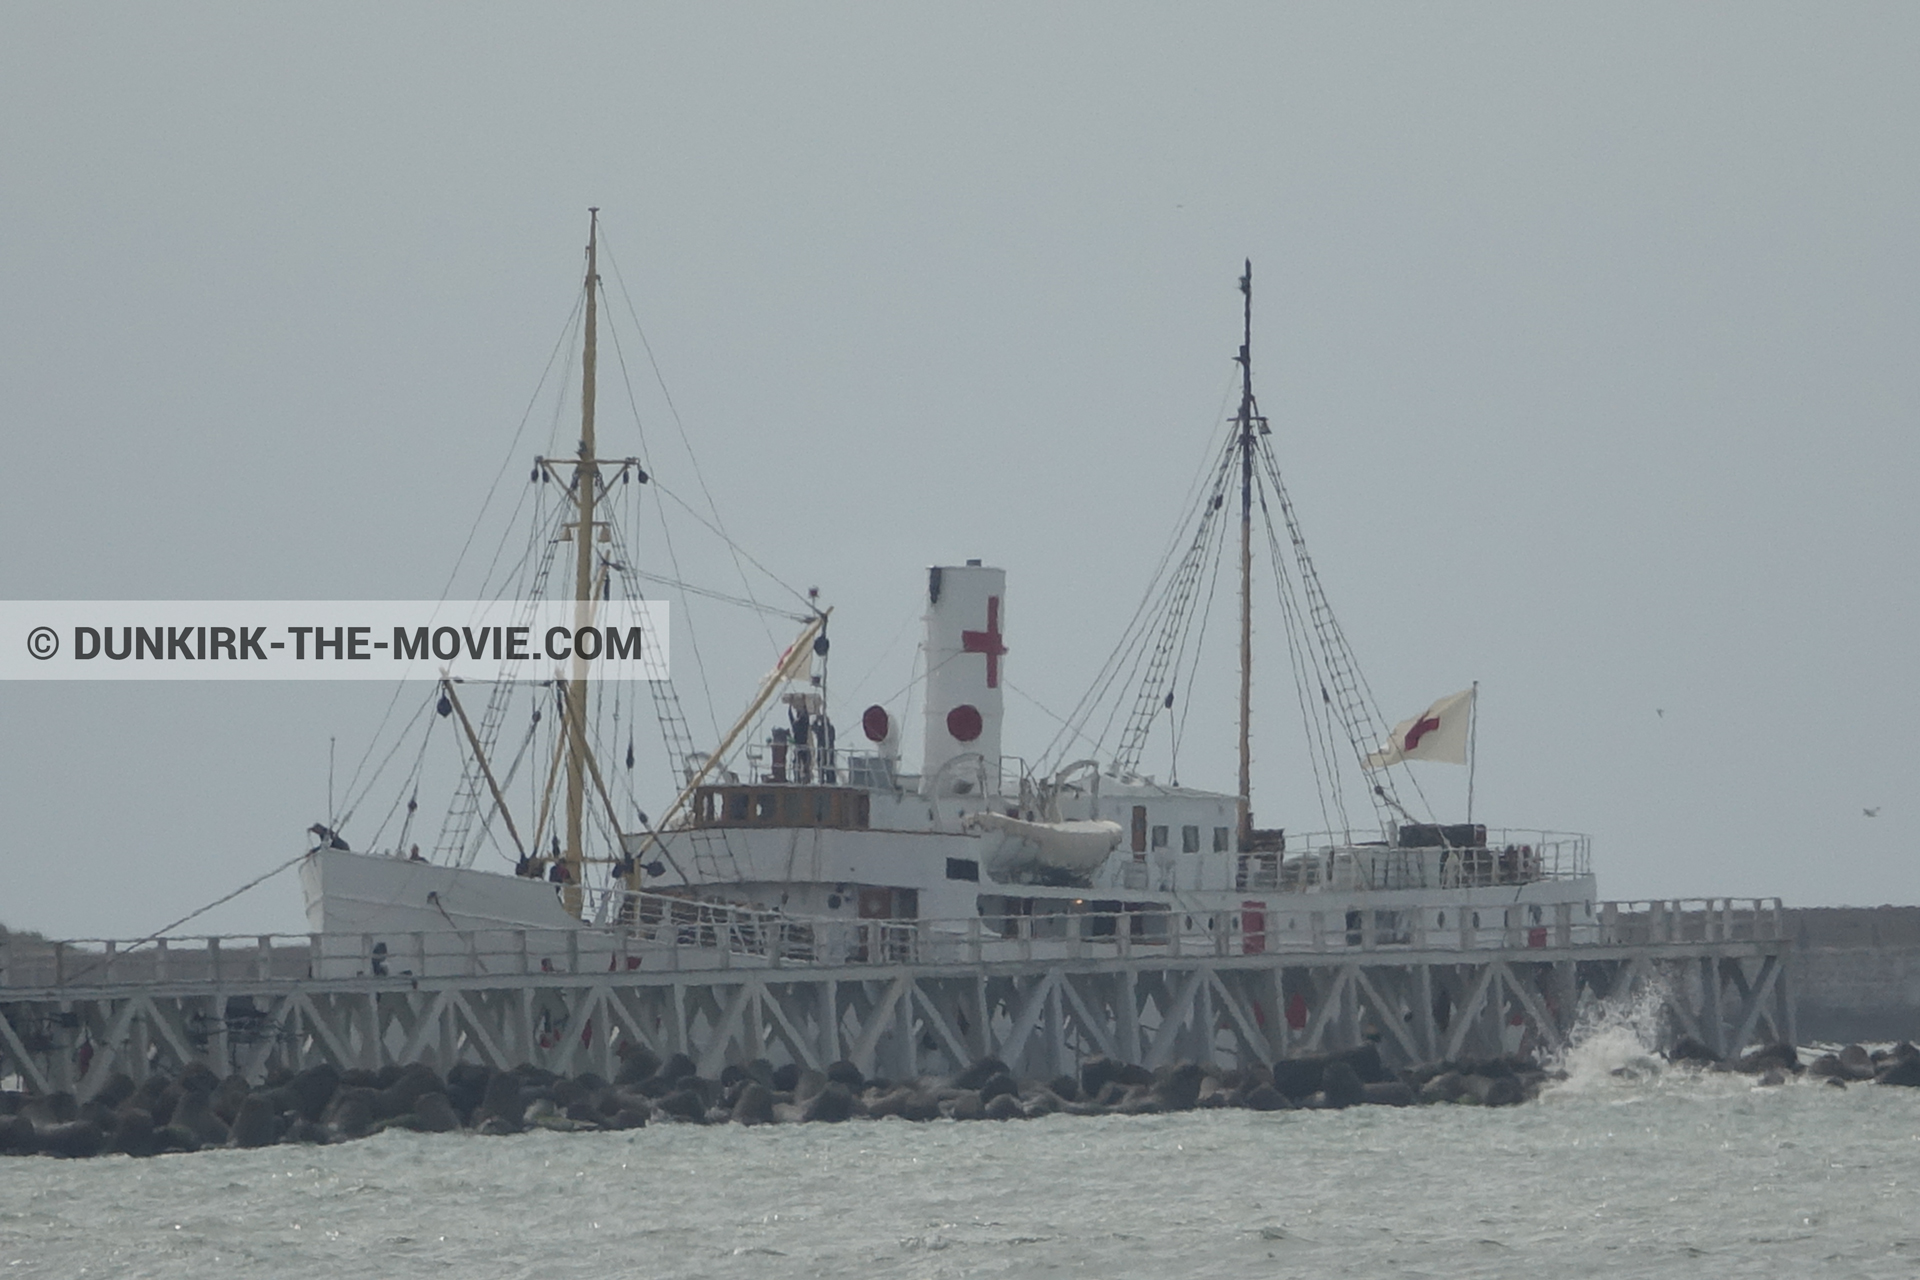 Picture with boat, grey sky, EST pier, rough sea, M/S Rogaland,  from behind the scene of the Dunkirk movie by Nolan